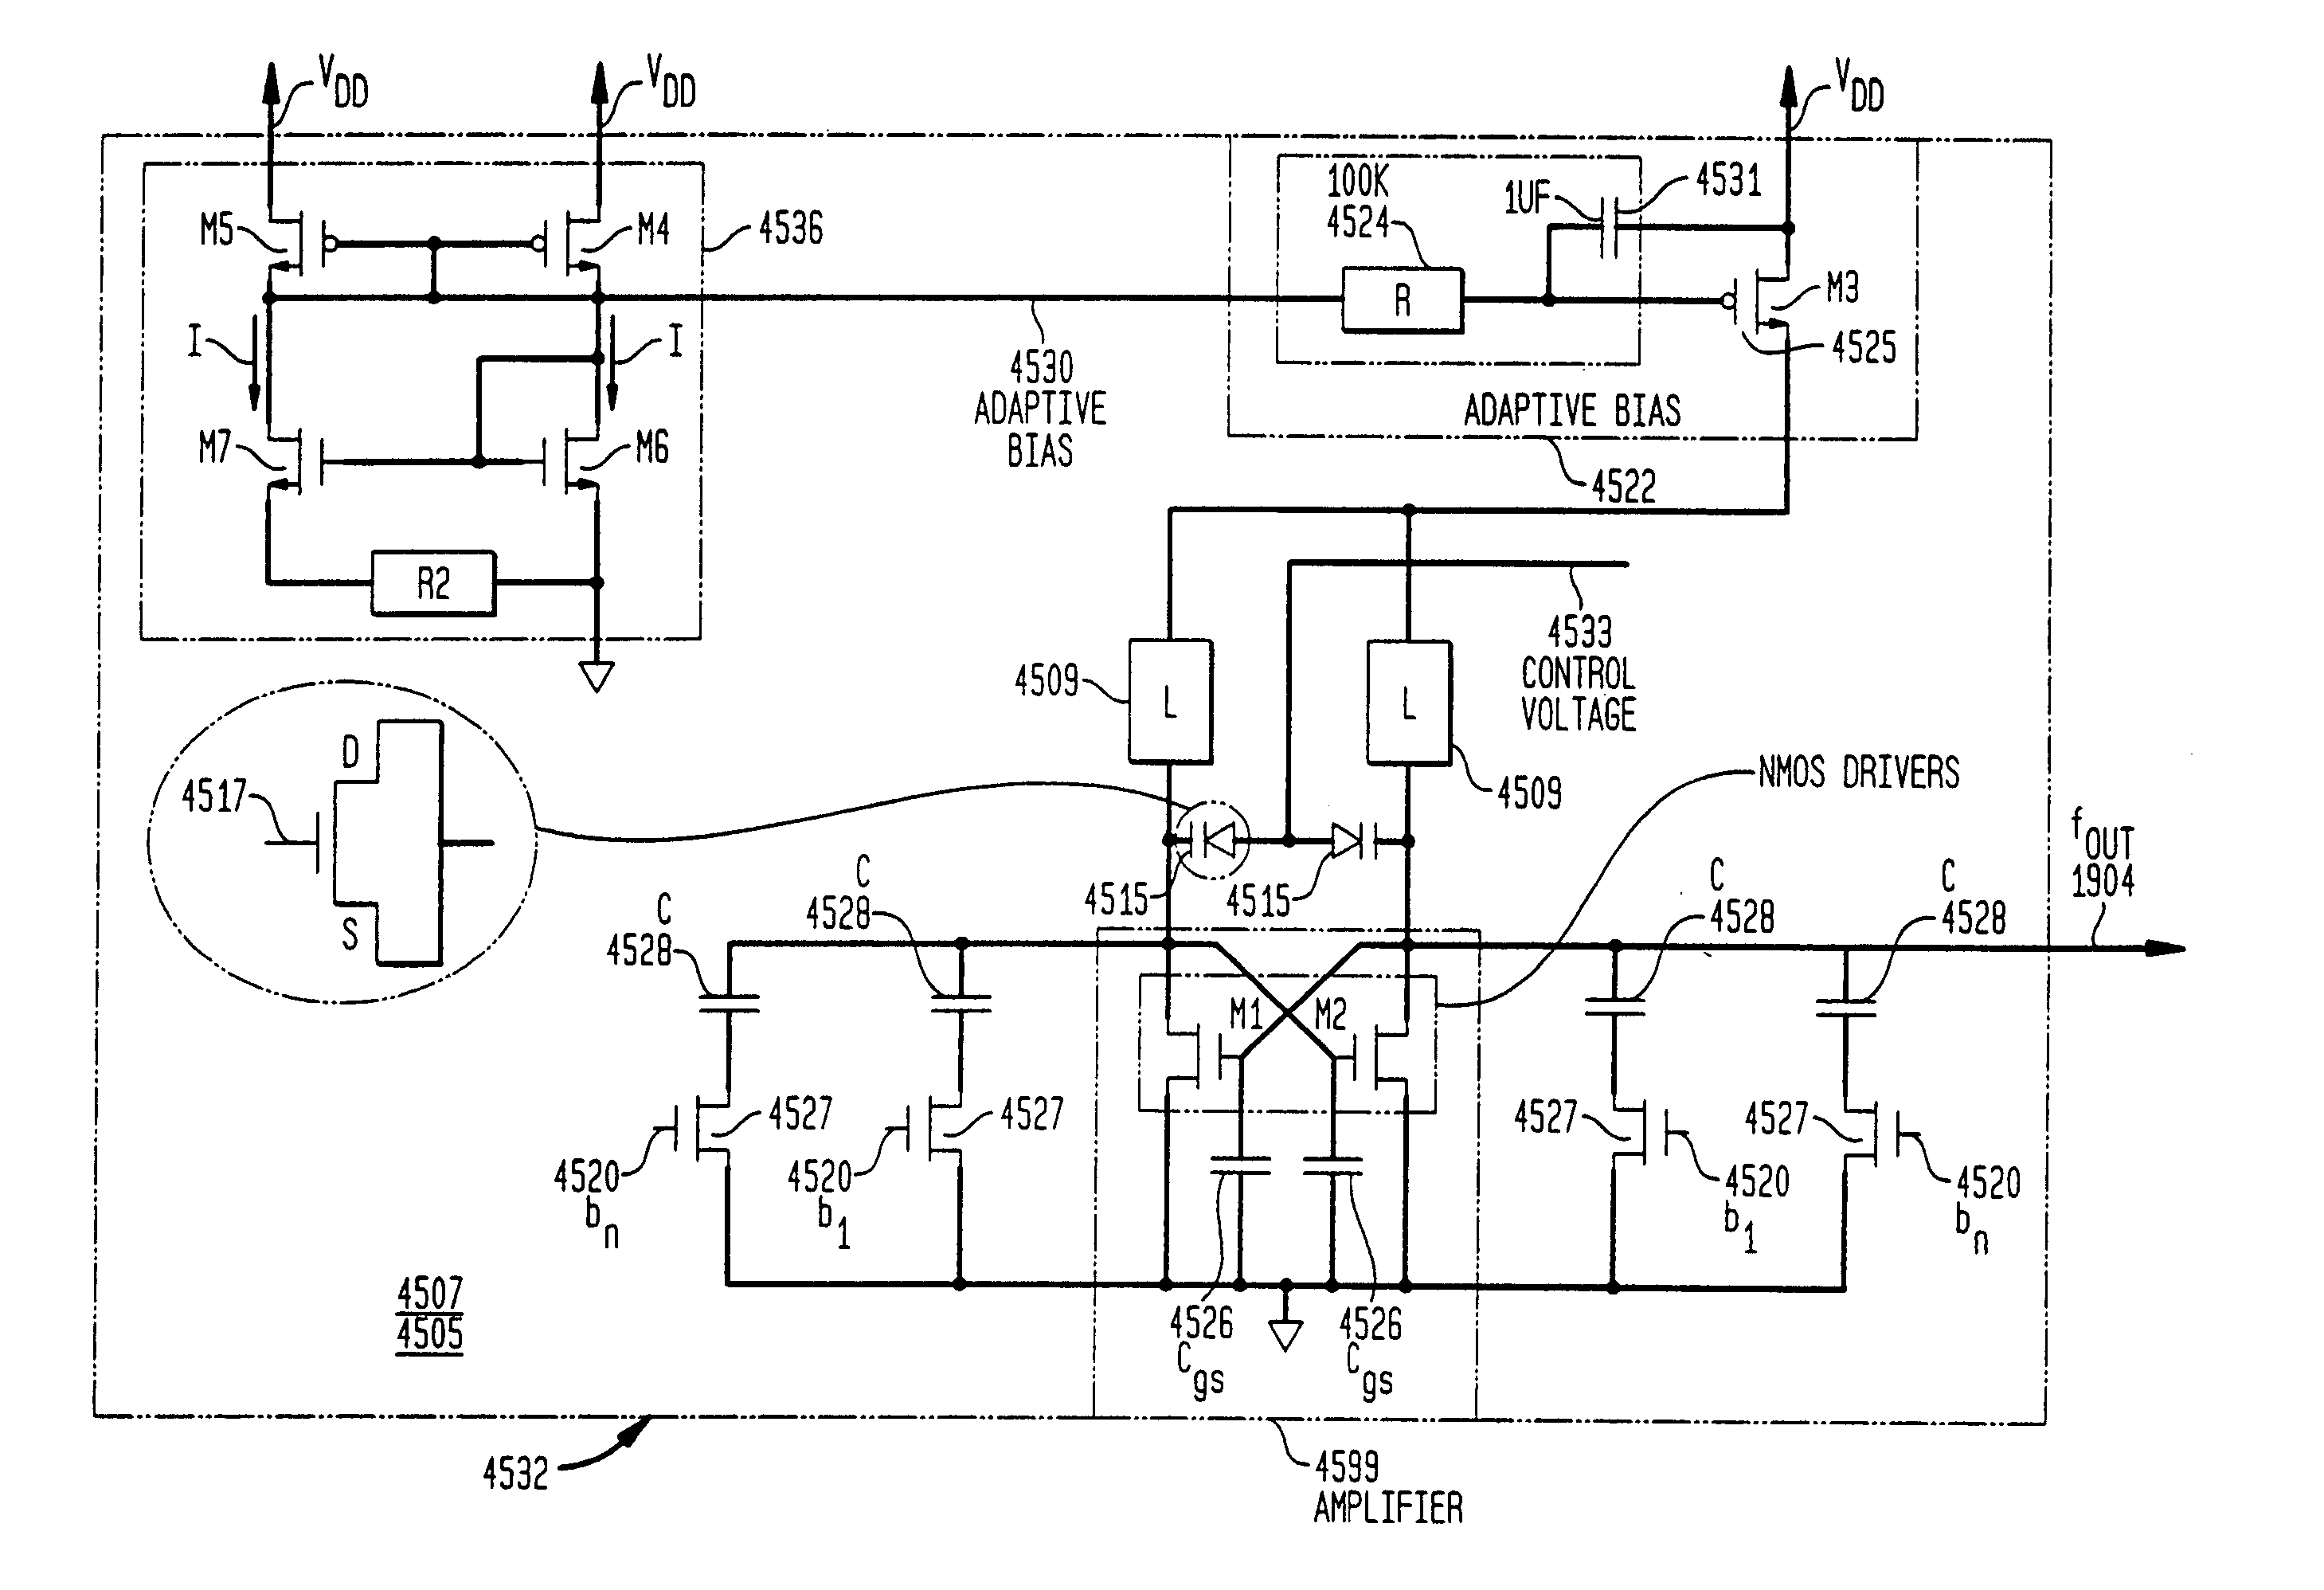 Integrated VCO having an improved tuning range over process and temperature variations